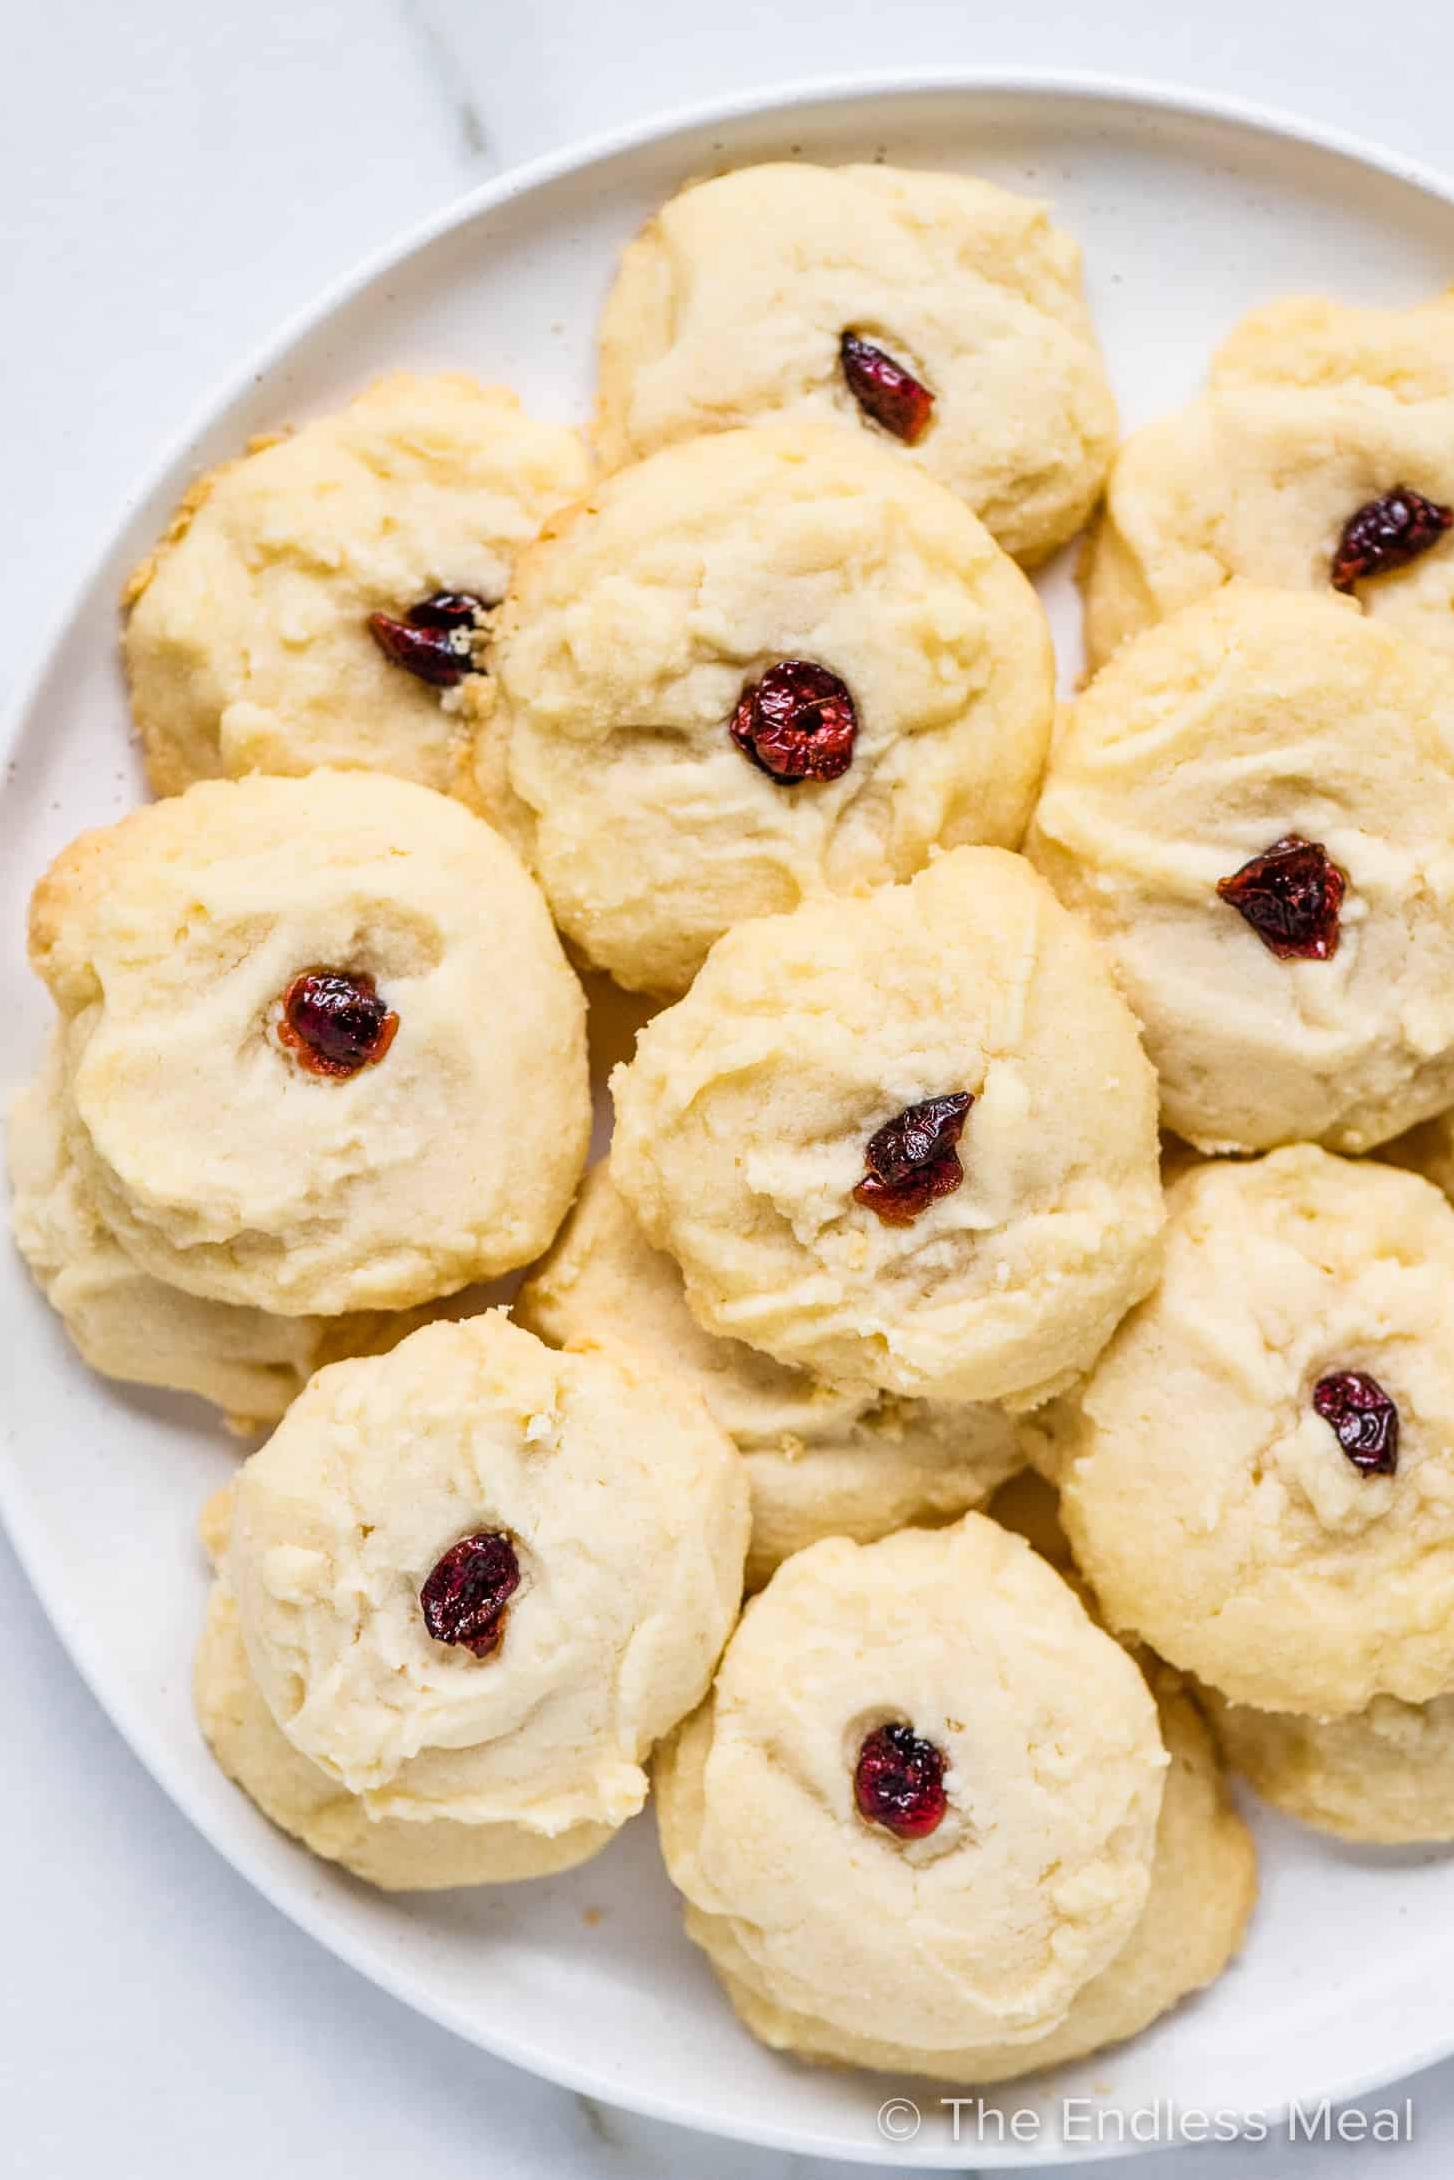  Light and airy, this shortbread will melt in your mouth.